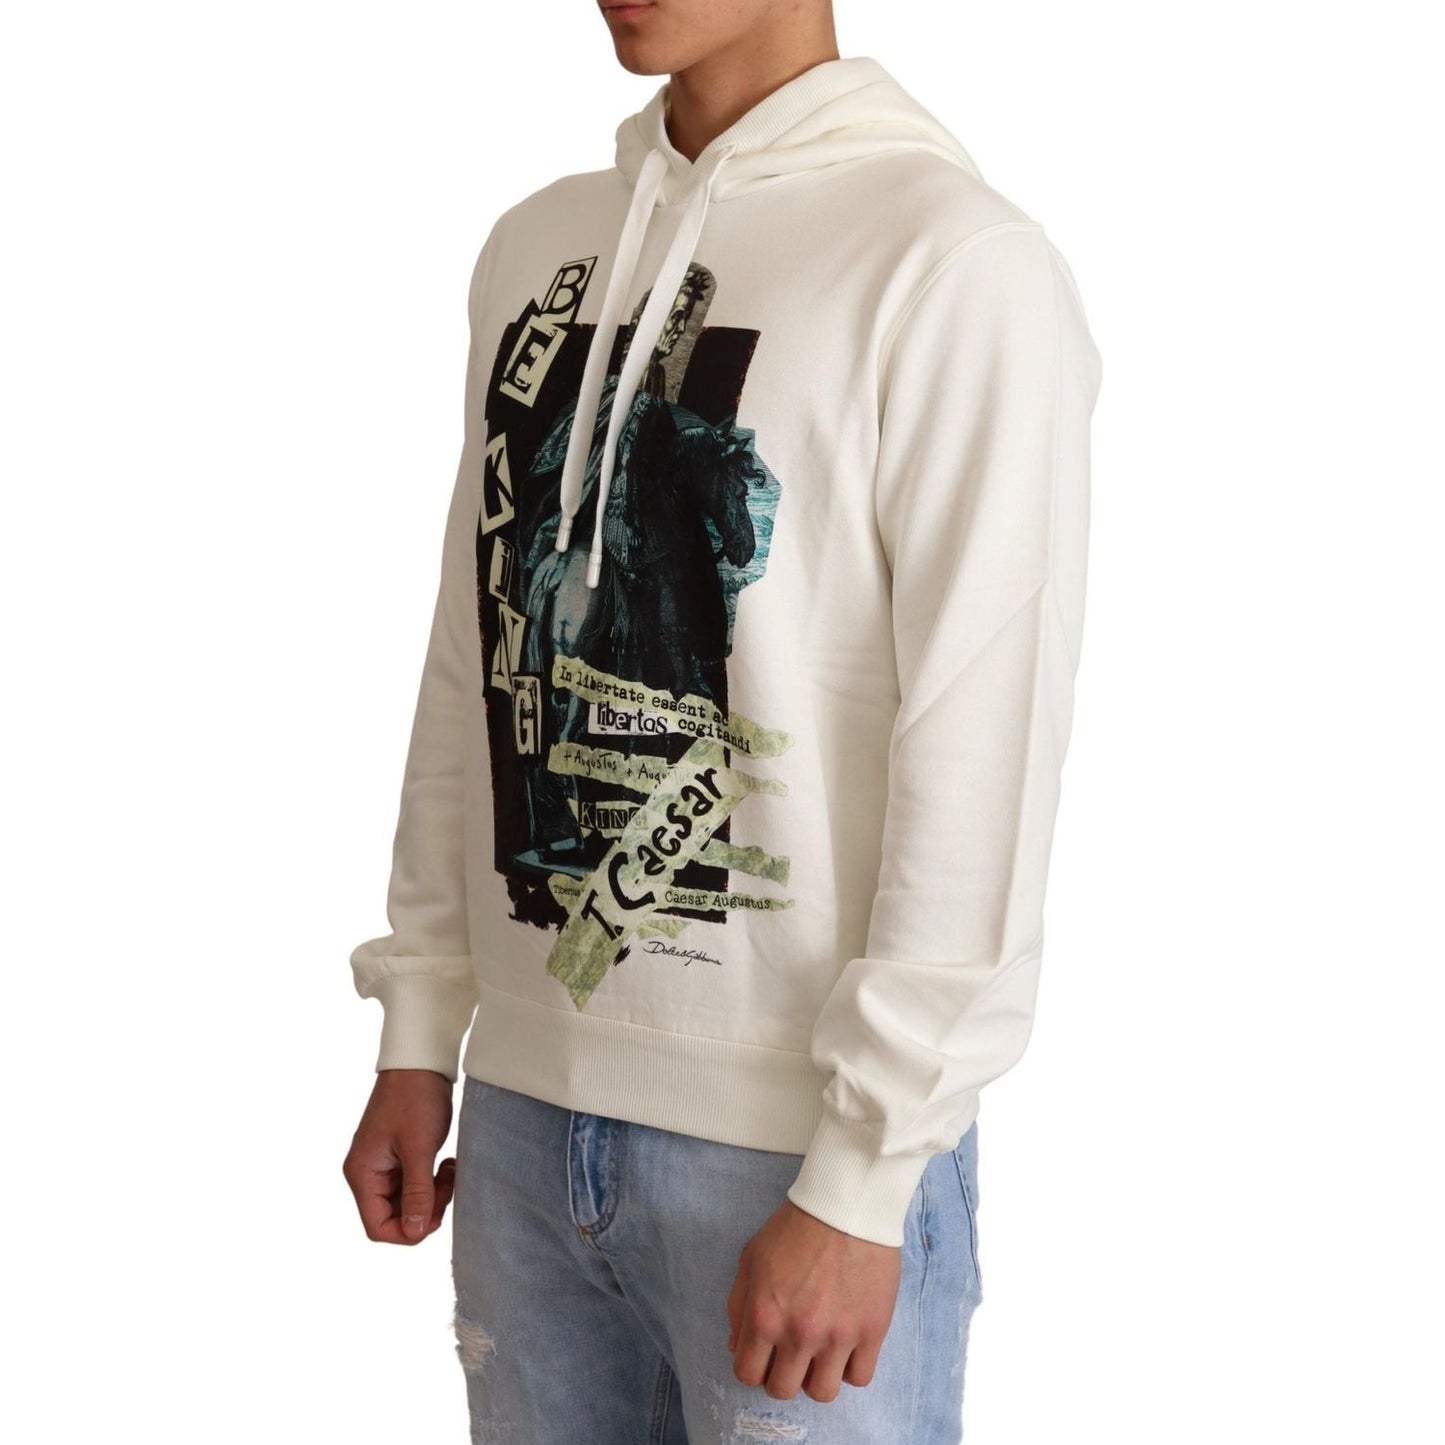 Dolce & Gabbana Regal King Motif Hooded Pullover Sweater white-king-ceasar-cotton-hooded-sweater IMG_9965-scaled-680d3837-b66.jpg